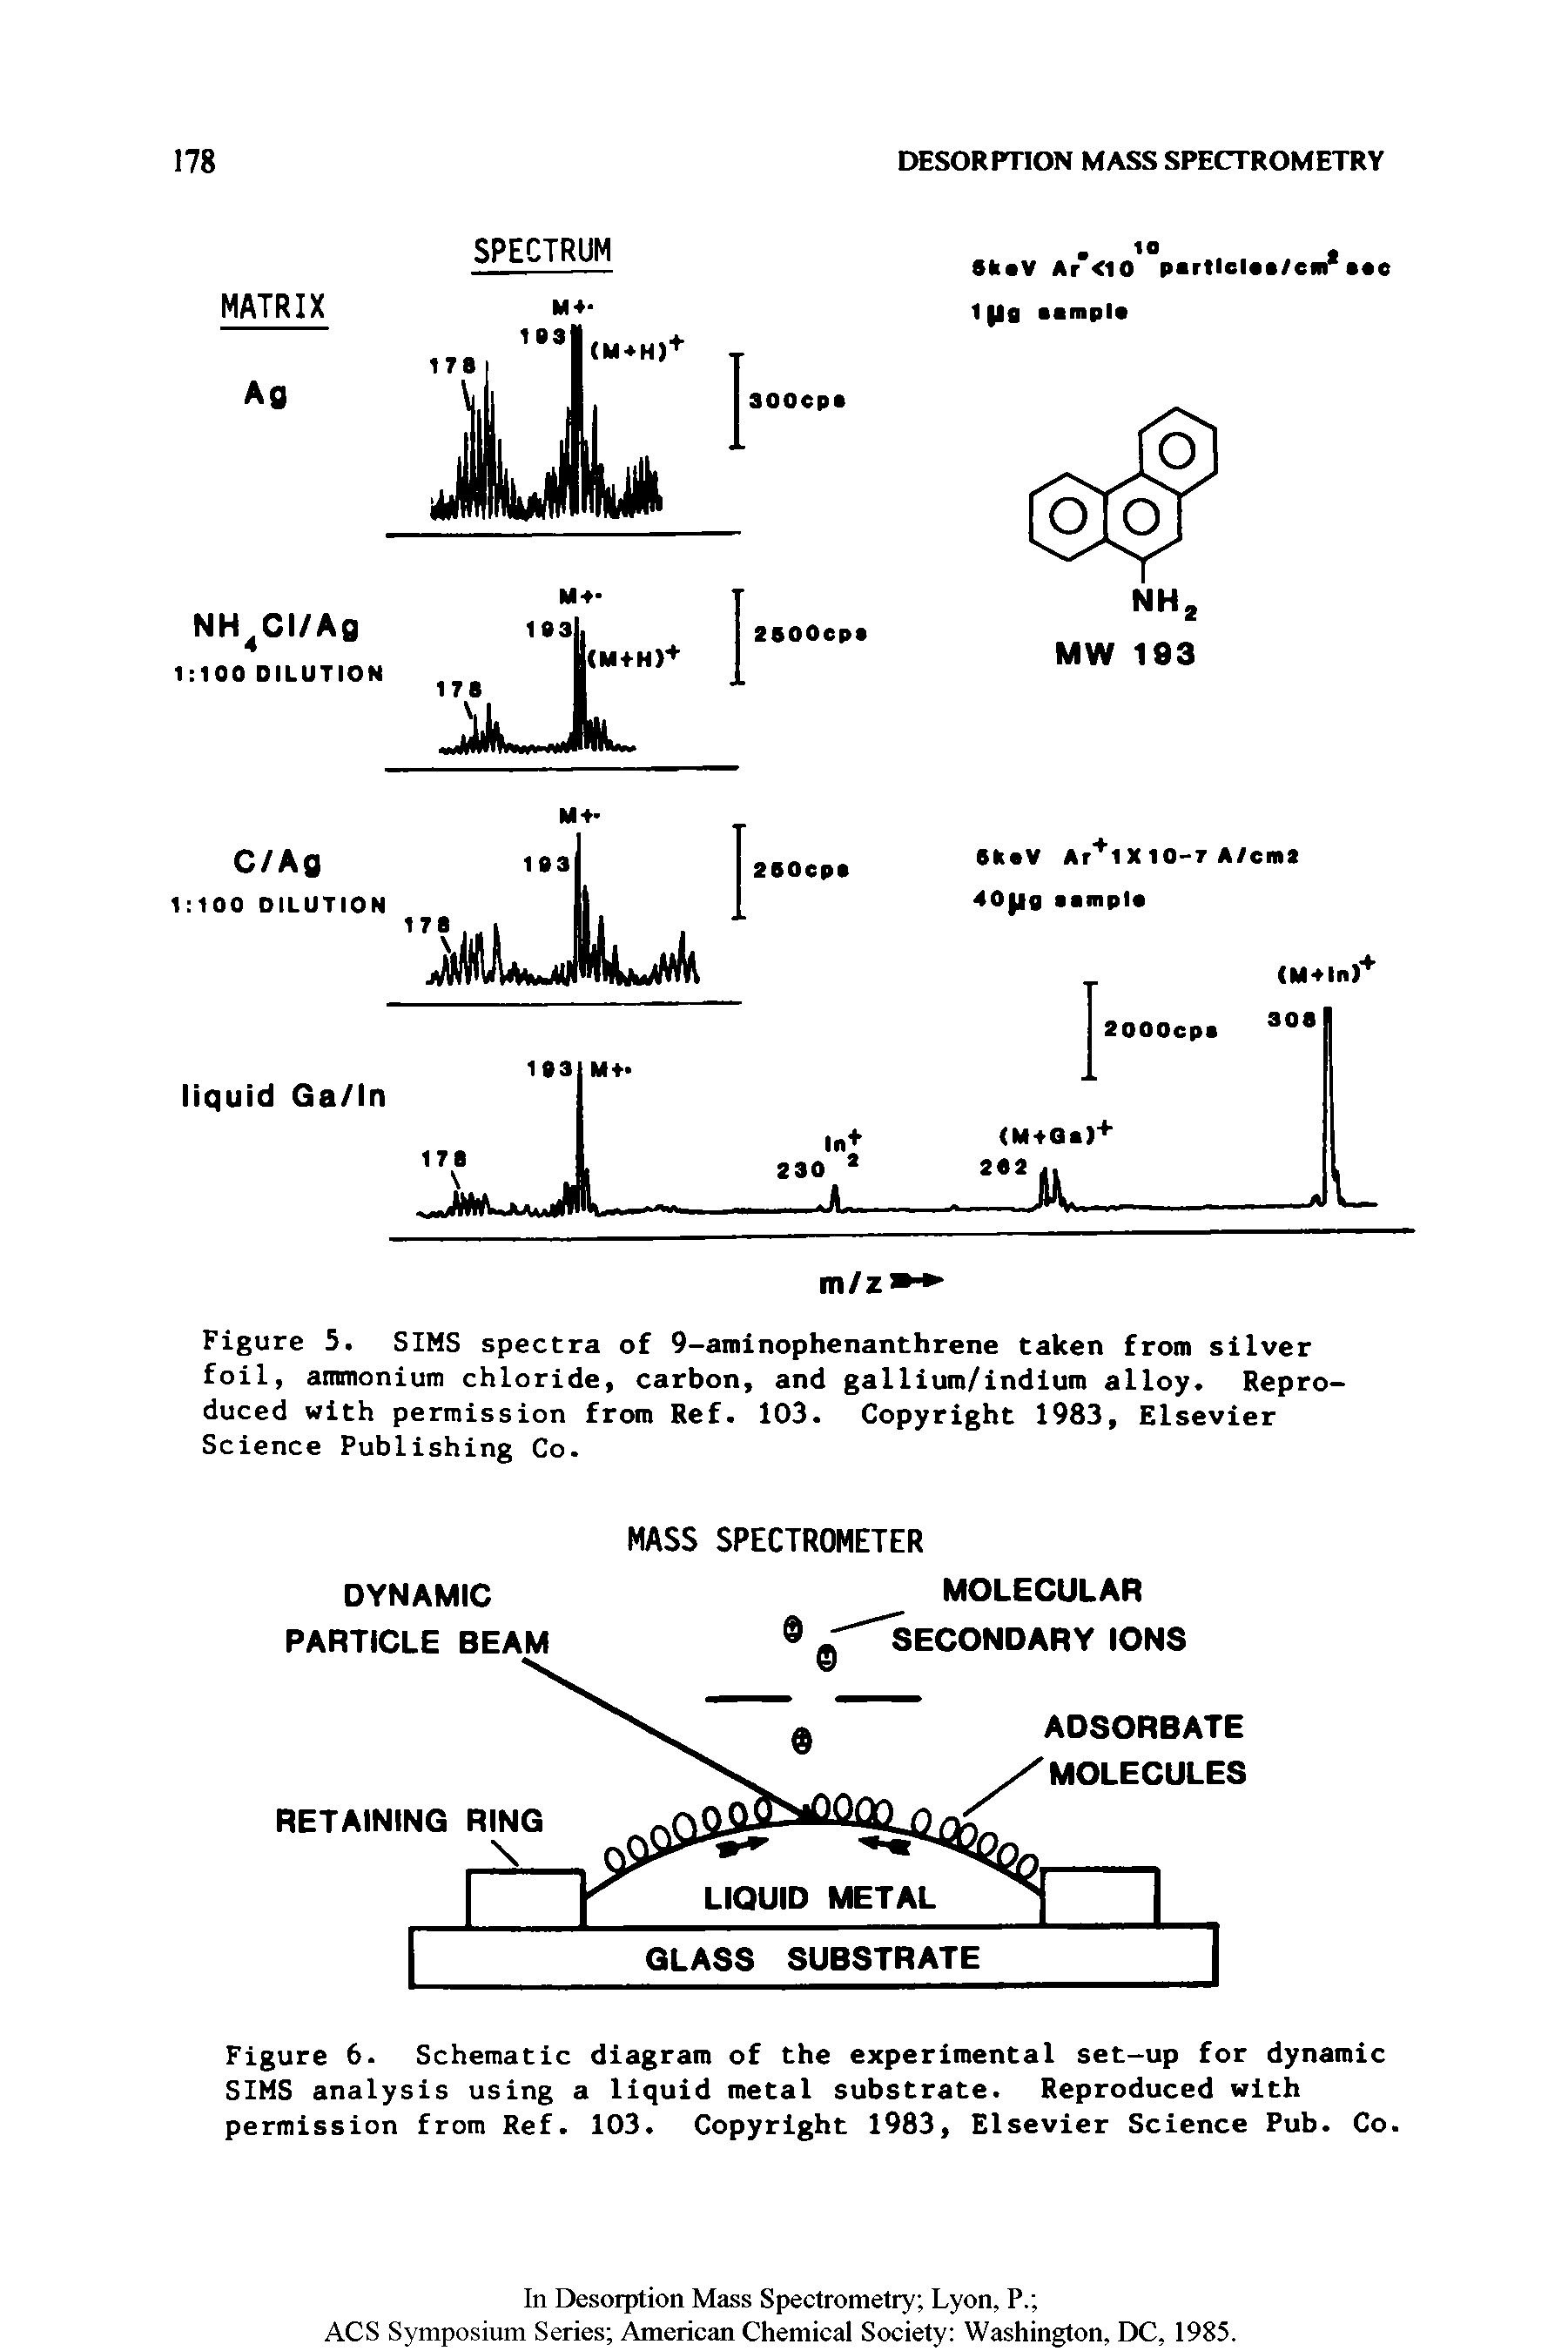 Figure 6. Schematic diagram of the experimental set-up for dynamic SIMS analysis using a liquid metal substrate. Reproduced with permission from Ref. 103. Copyright 1983, Elsevier Science Pub. Co.